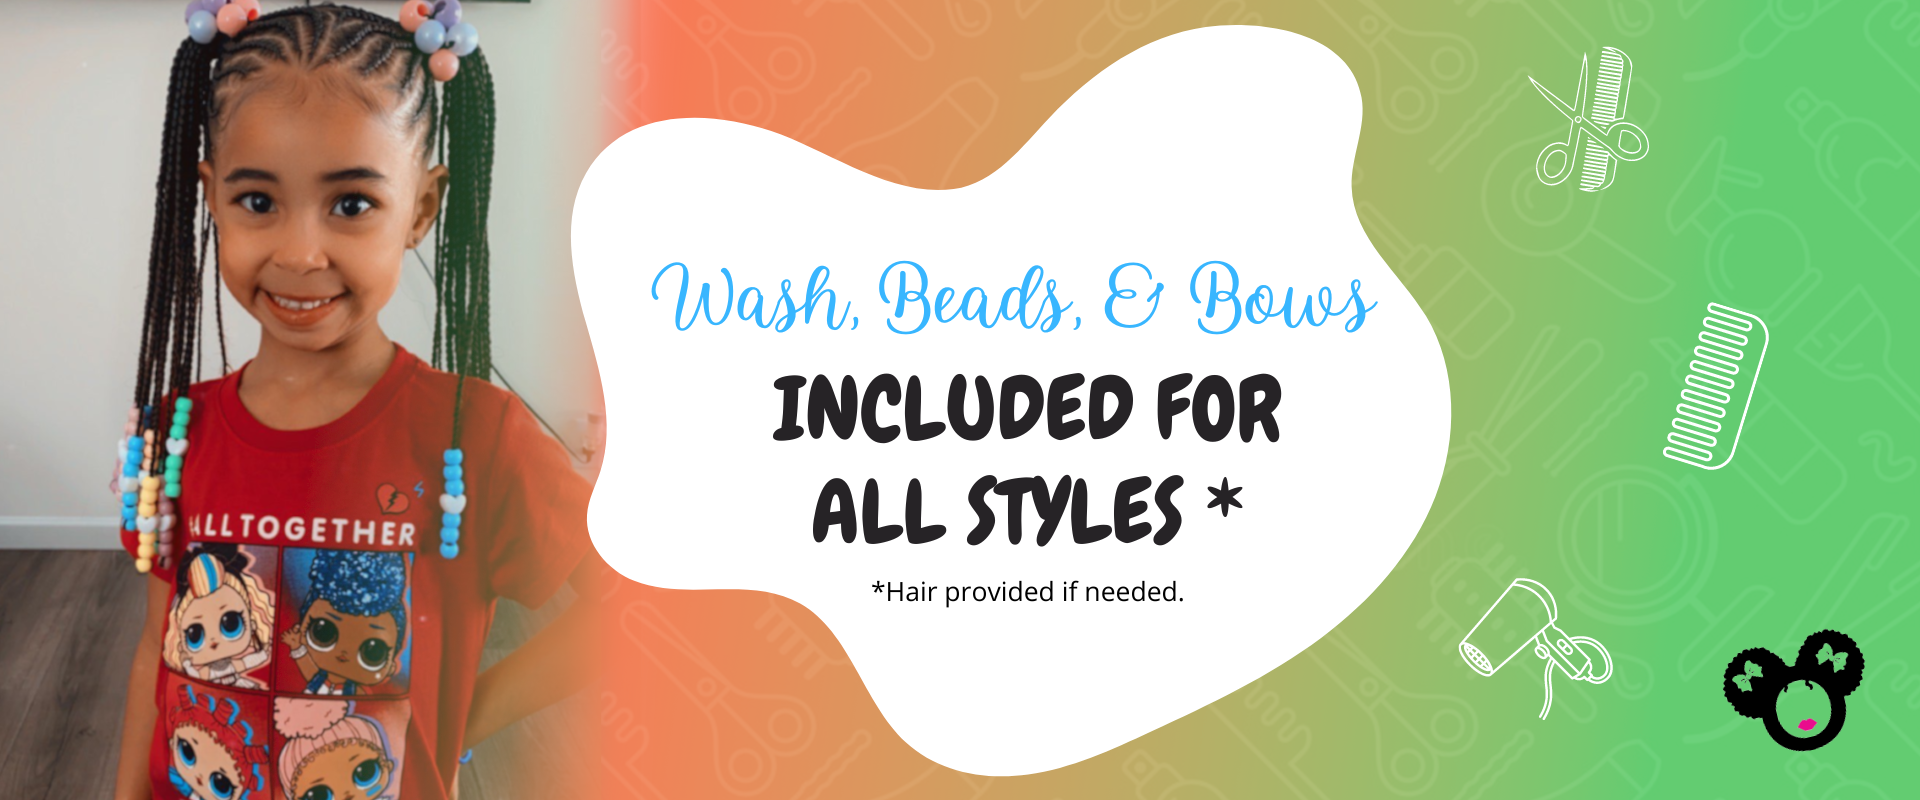 wash, beads, and bows included for all styles. Hair provided if needed.